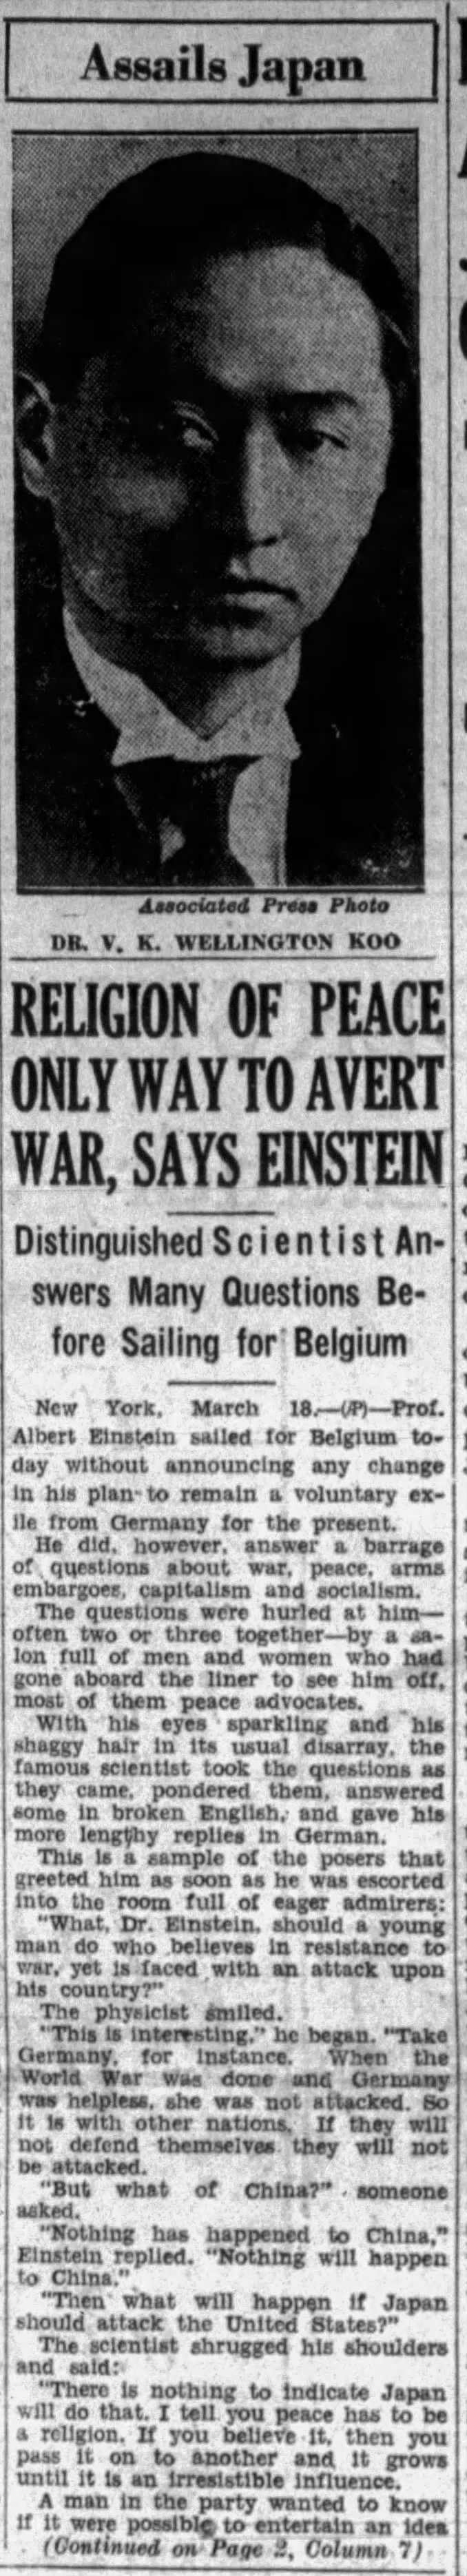 Religion of Peace Only Way To Avert War, Says Einstein